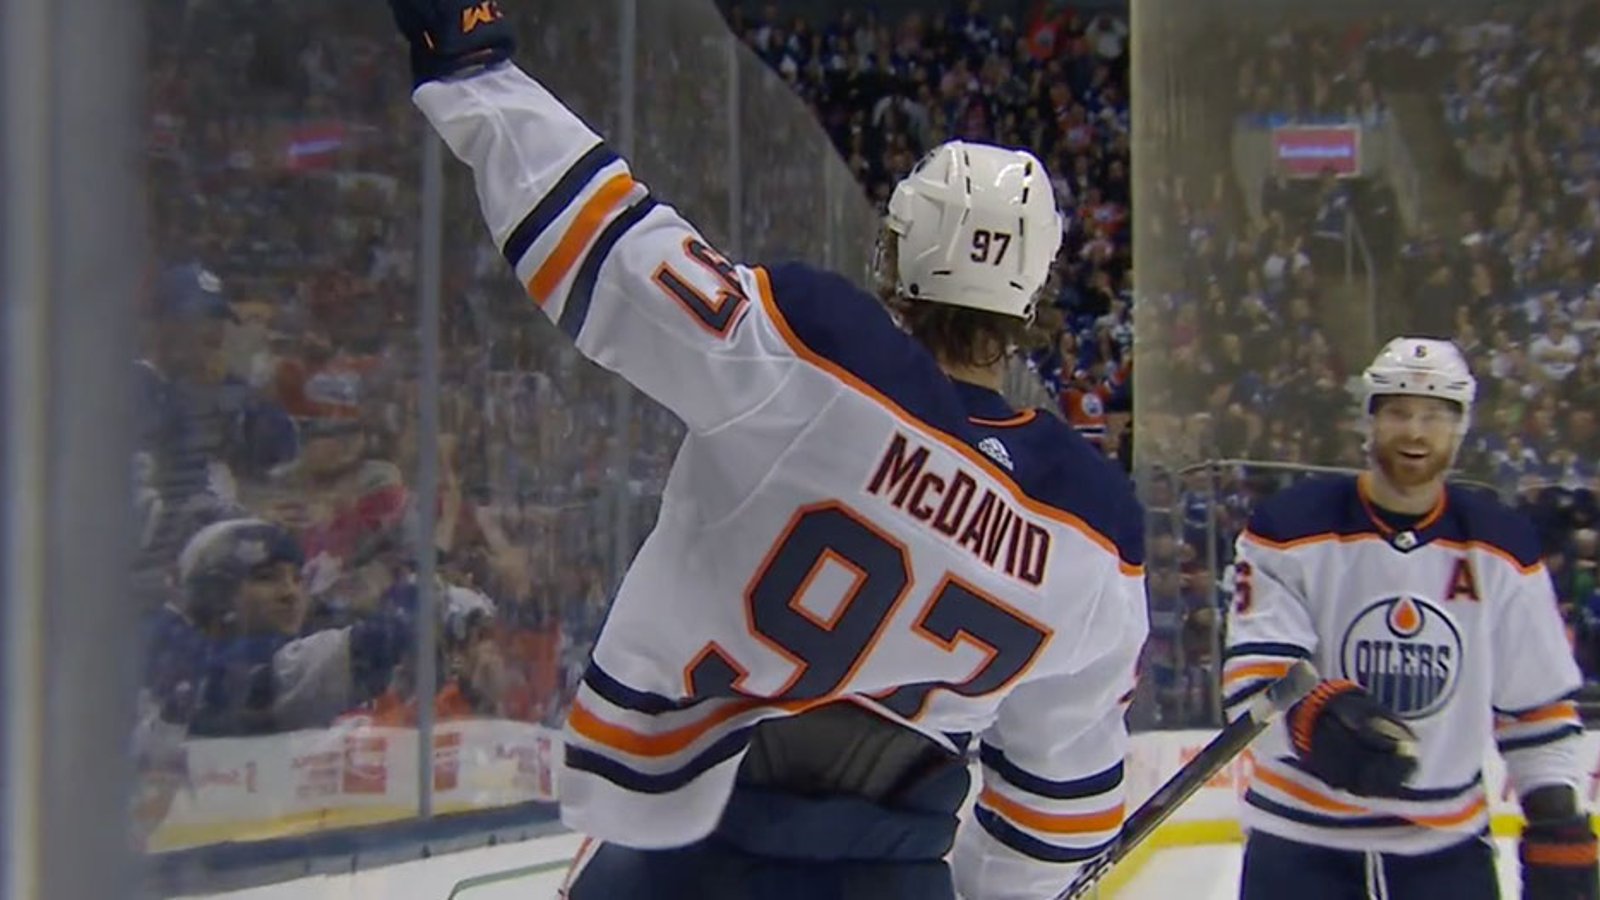 McDavid makes Morgan Rielly look like a beer leaguer with incredible goal